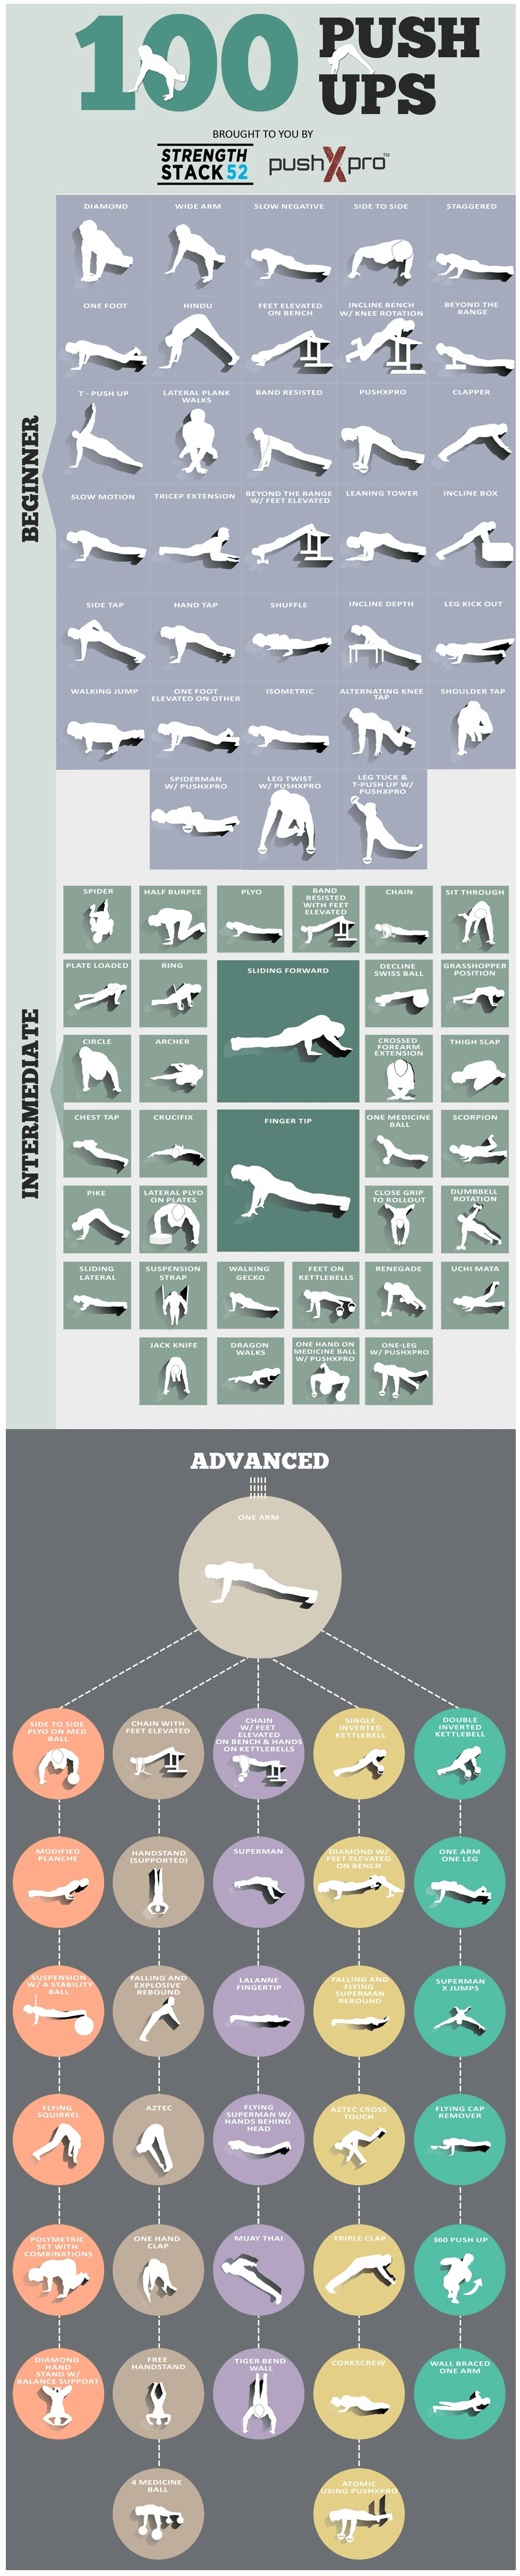 100 Push Up Variations - Stack 52